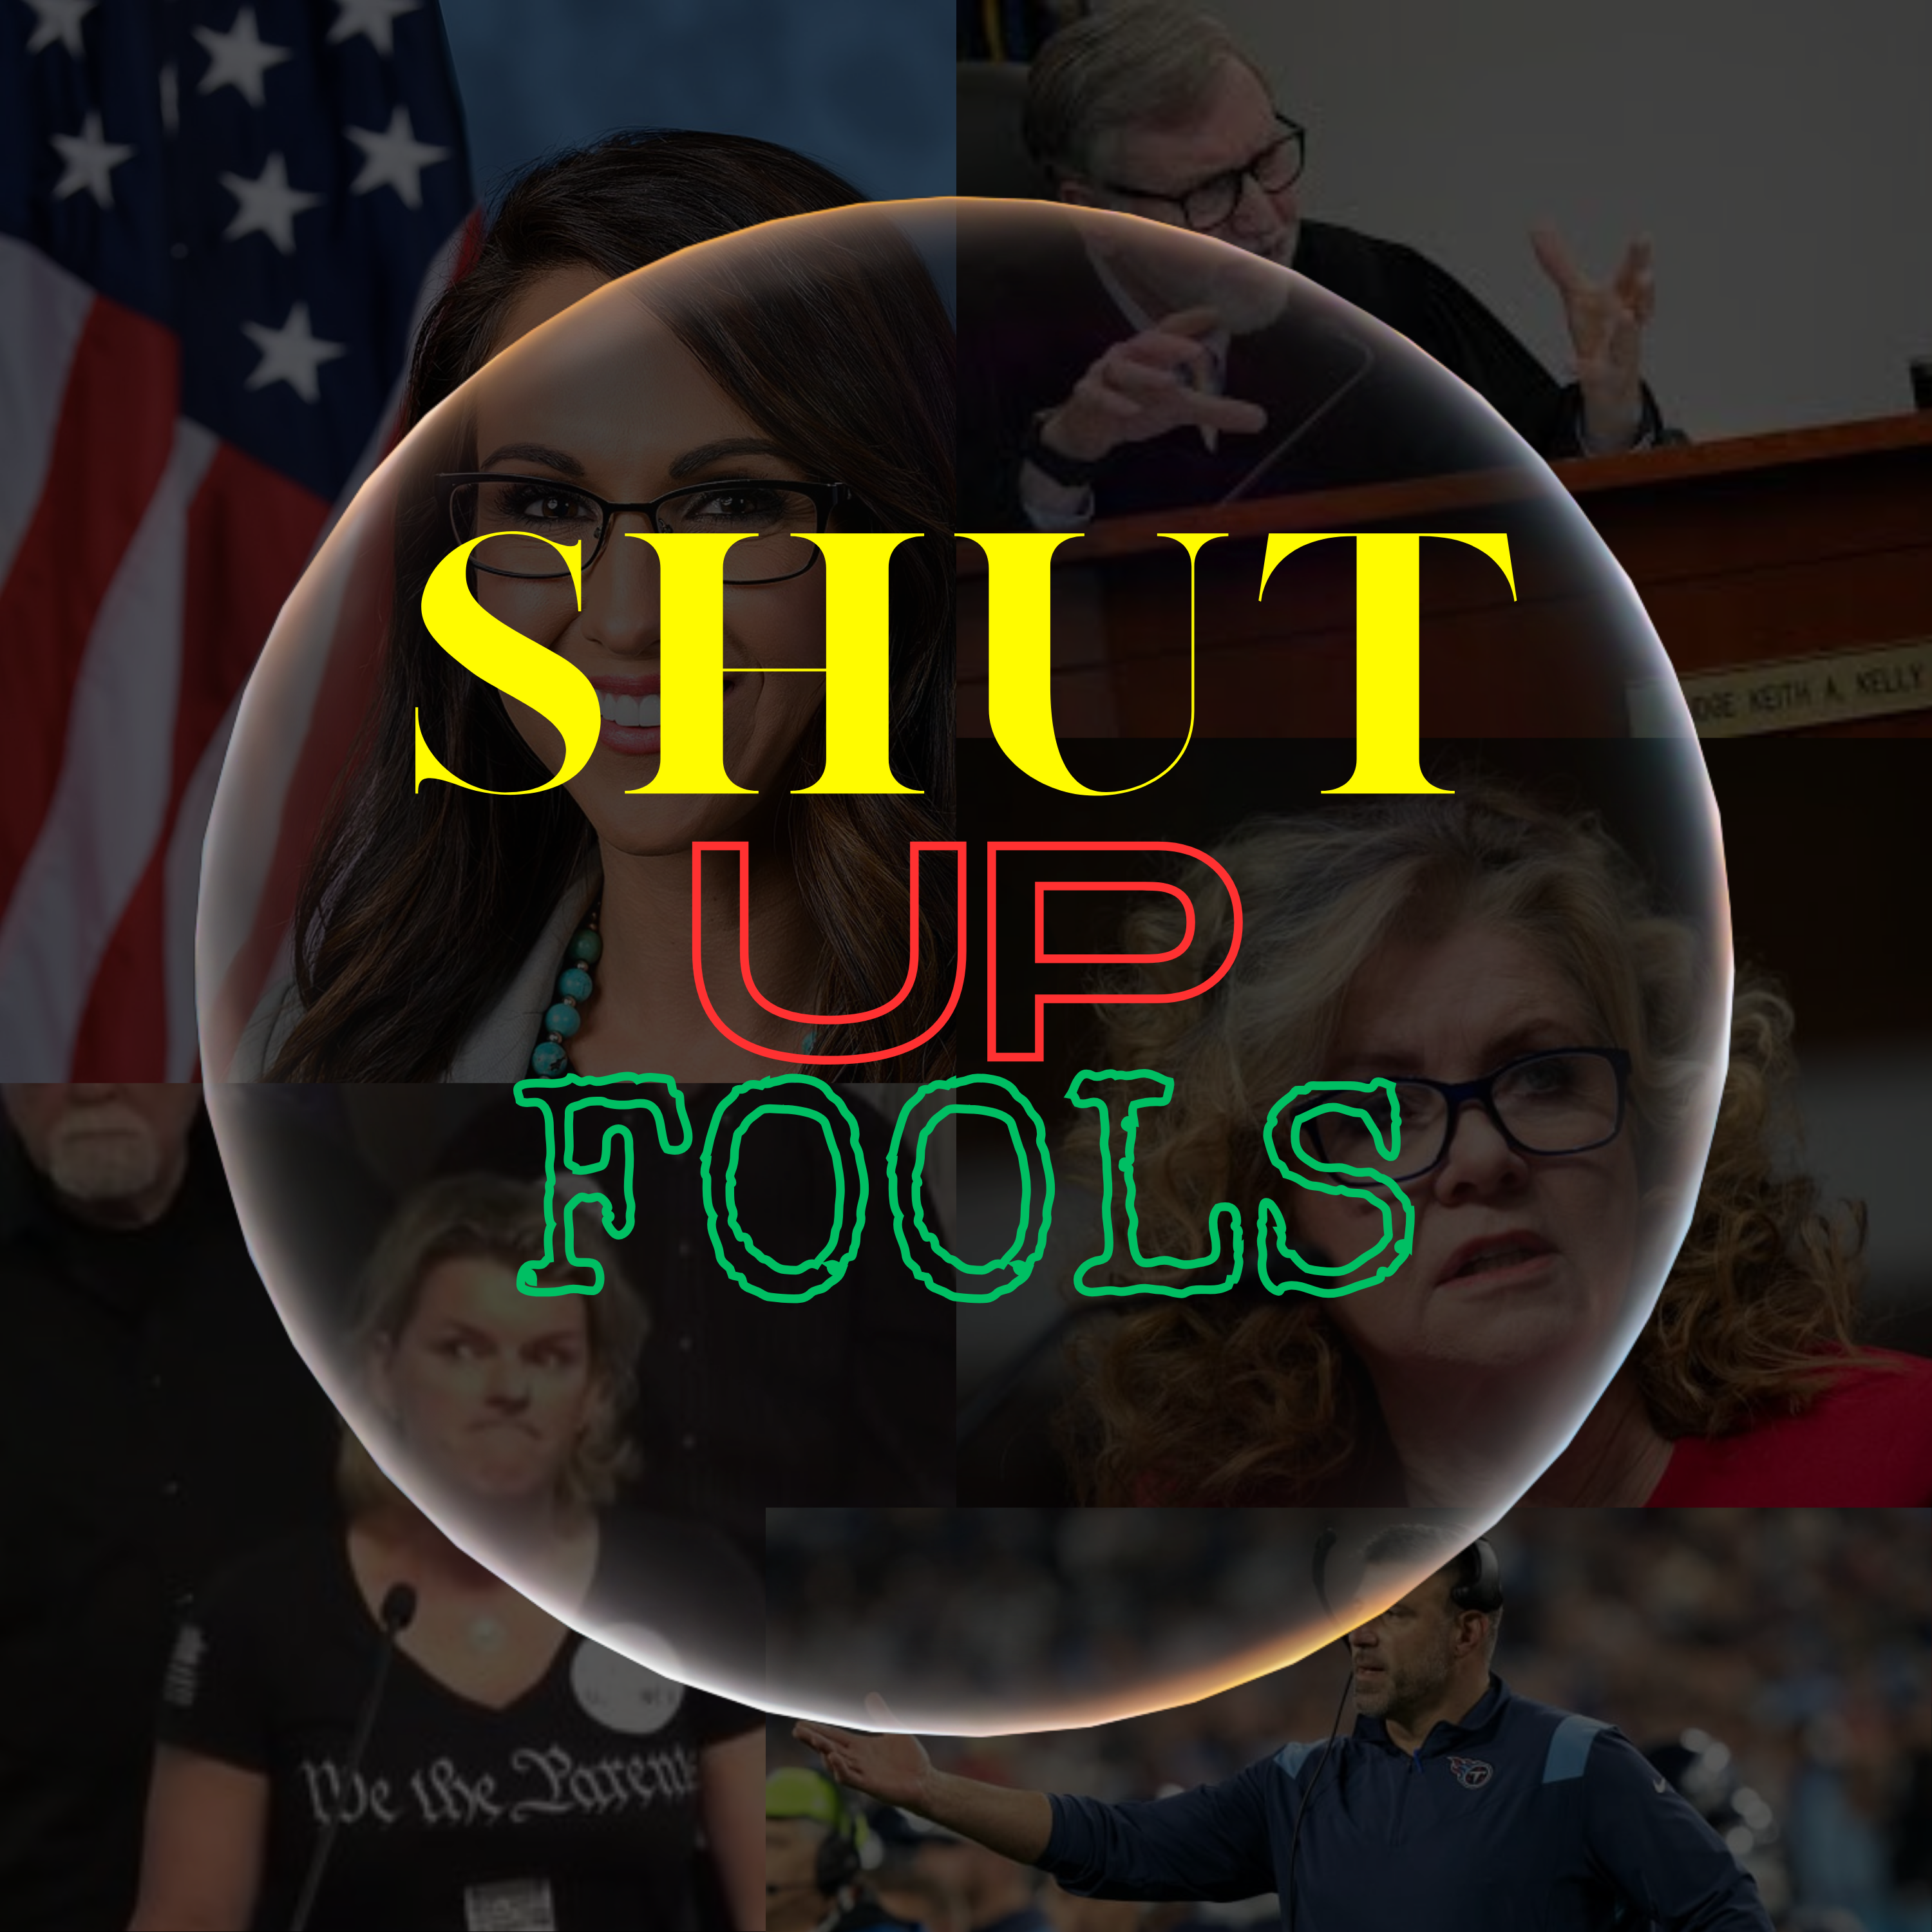 A blackened box with photos of this week's "Shut Up Fool" award recipients. Shut Up Fool is in yellow red and green lettering.